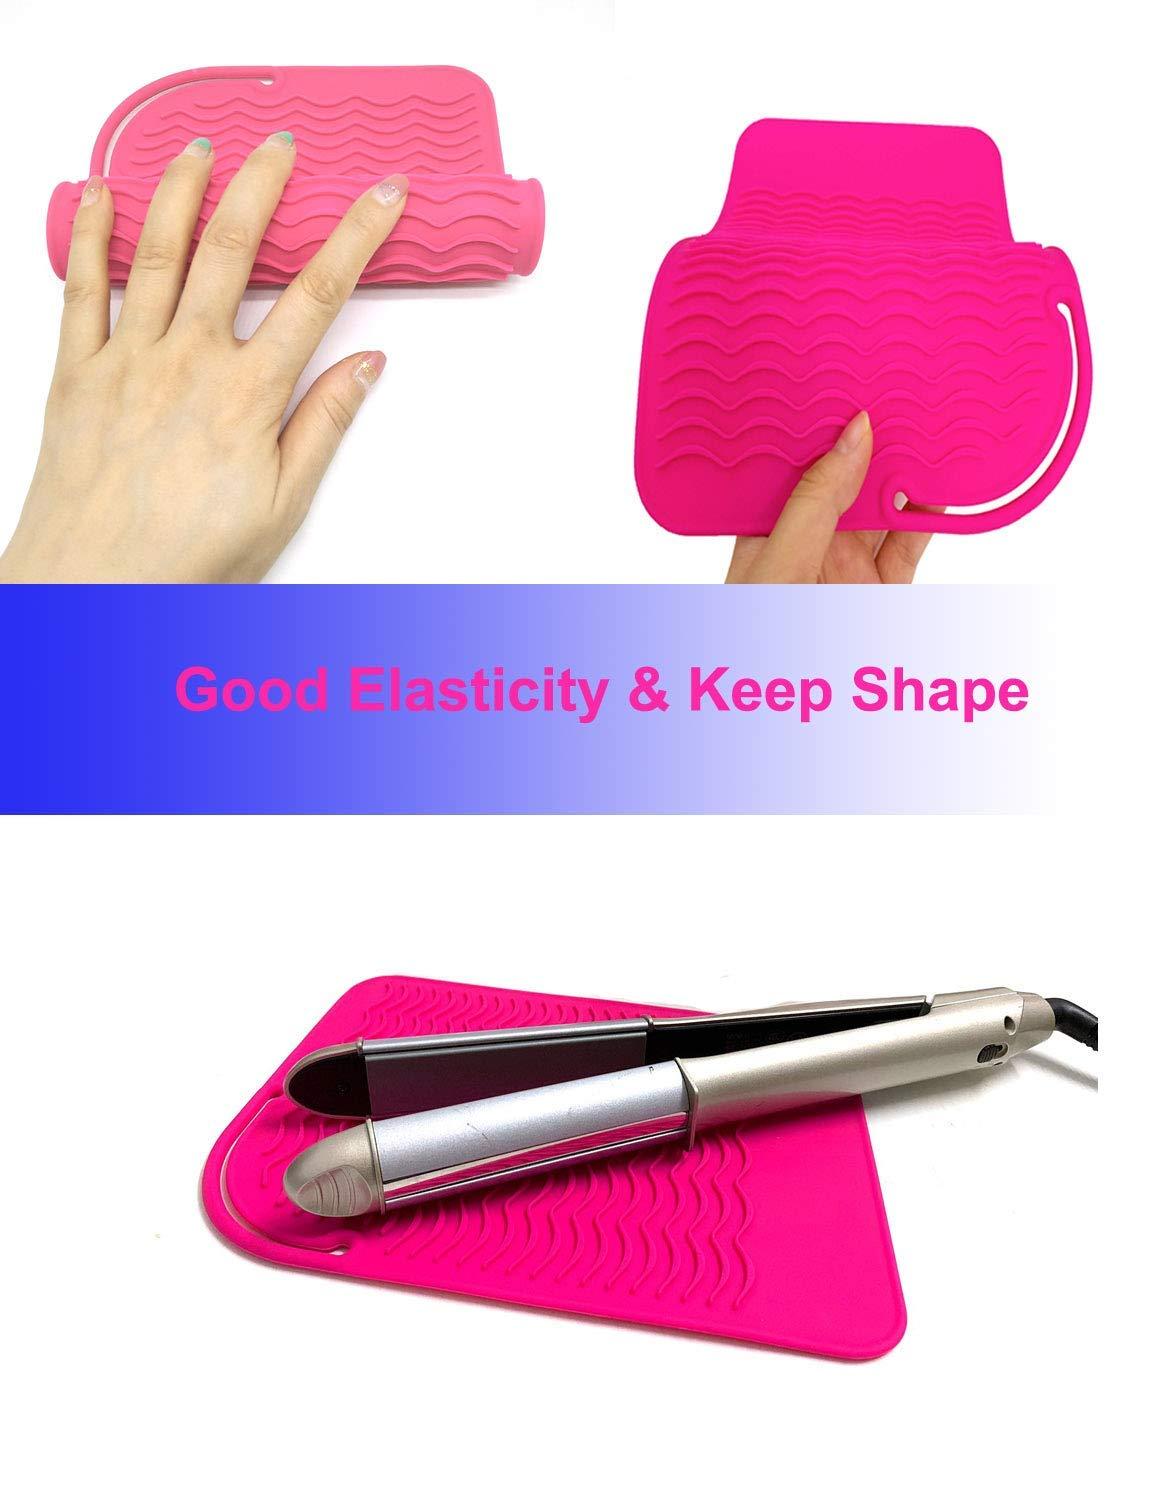 Heat Resistant Mat for Curling Iron Flat Irons and Hair